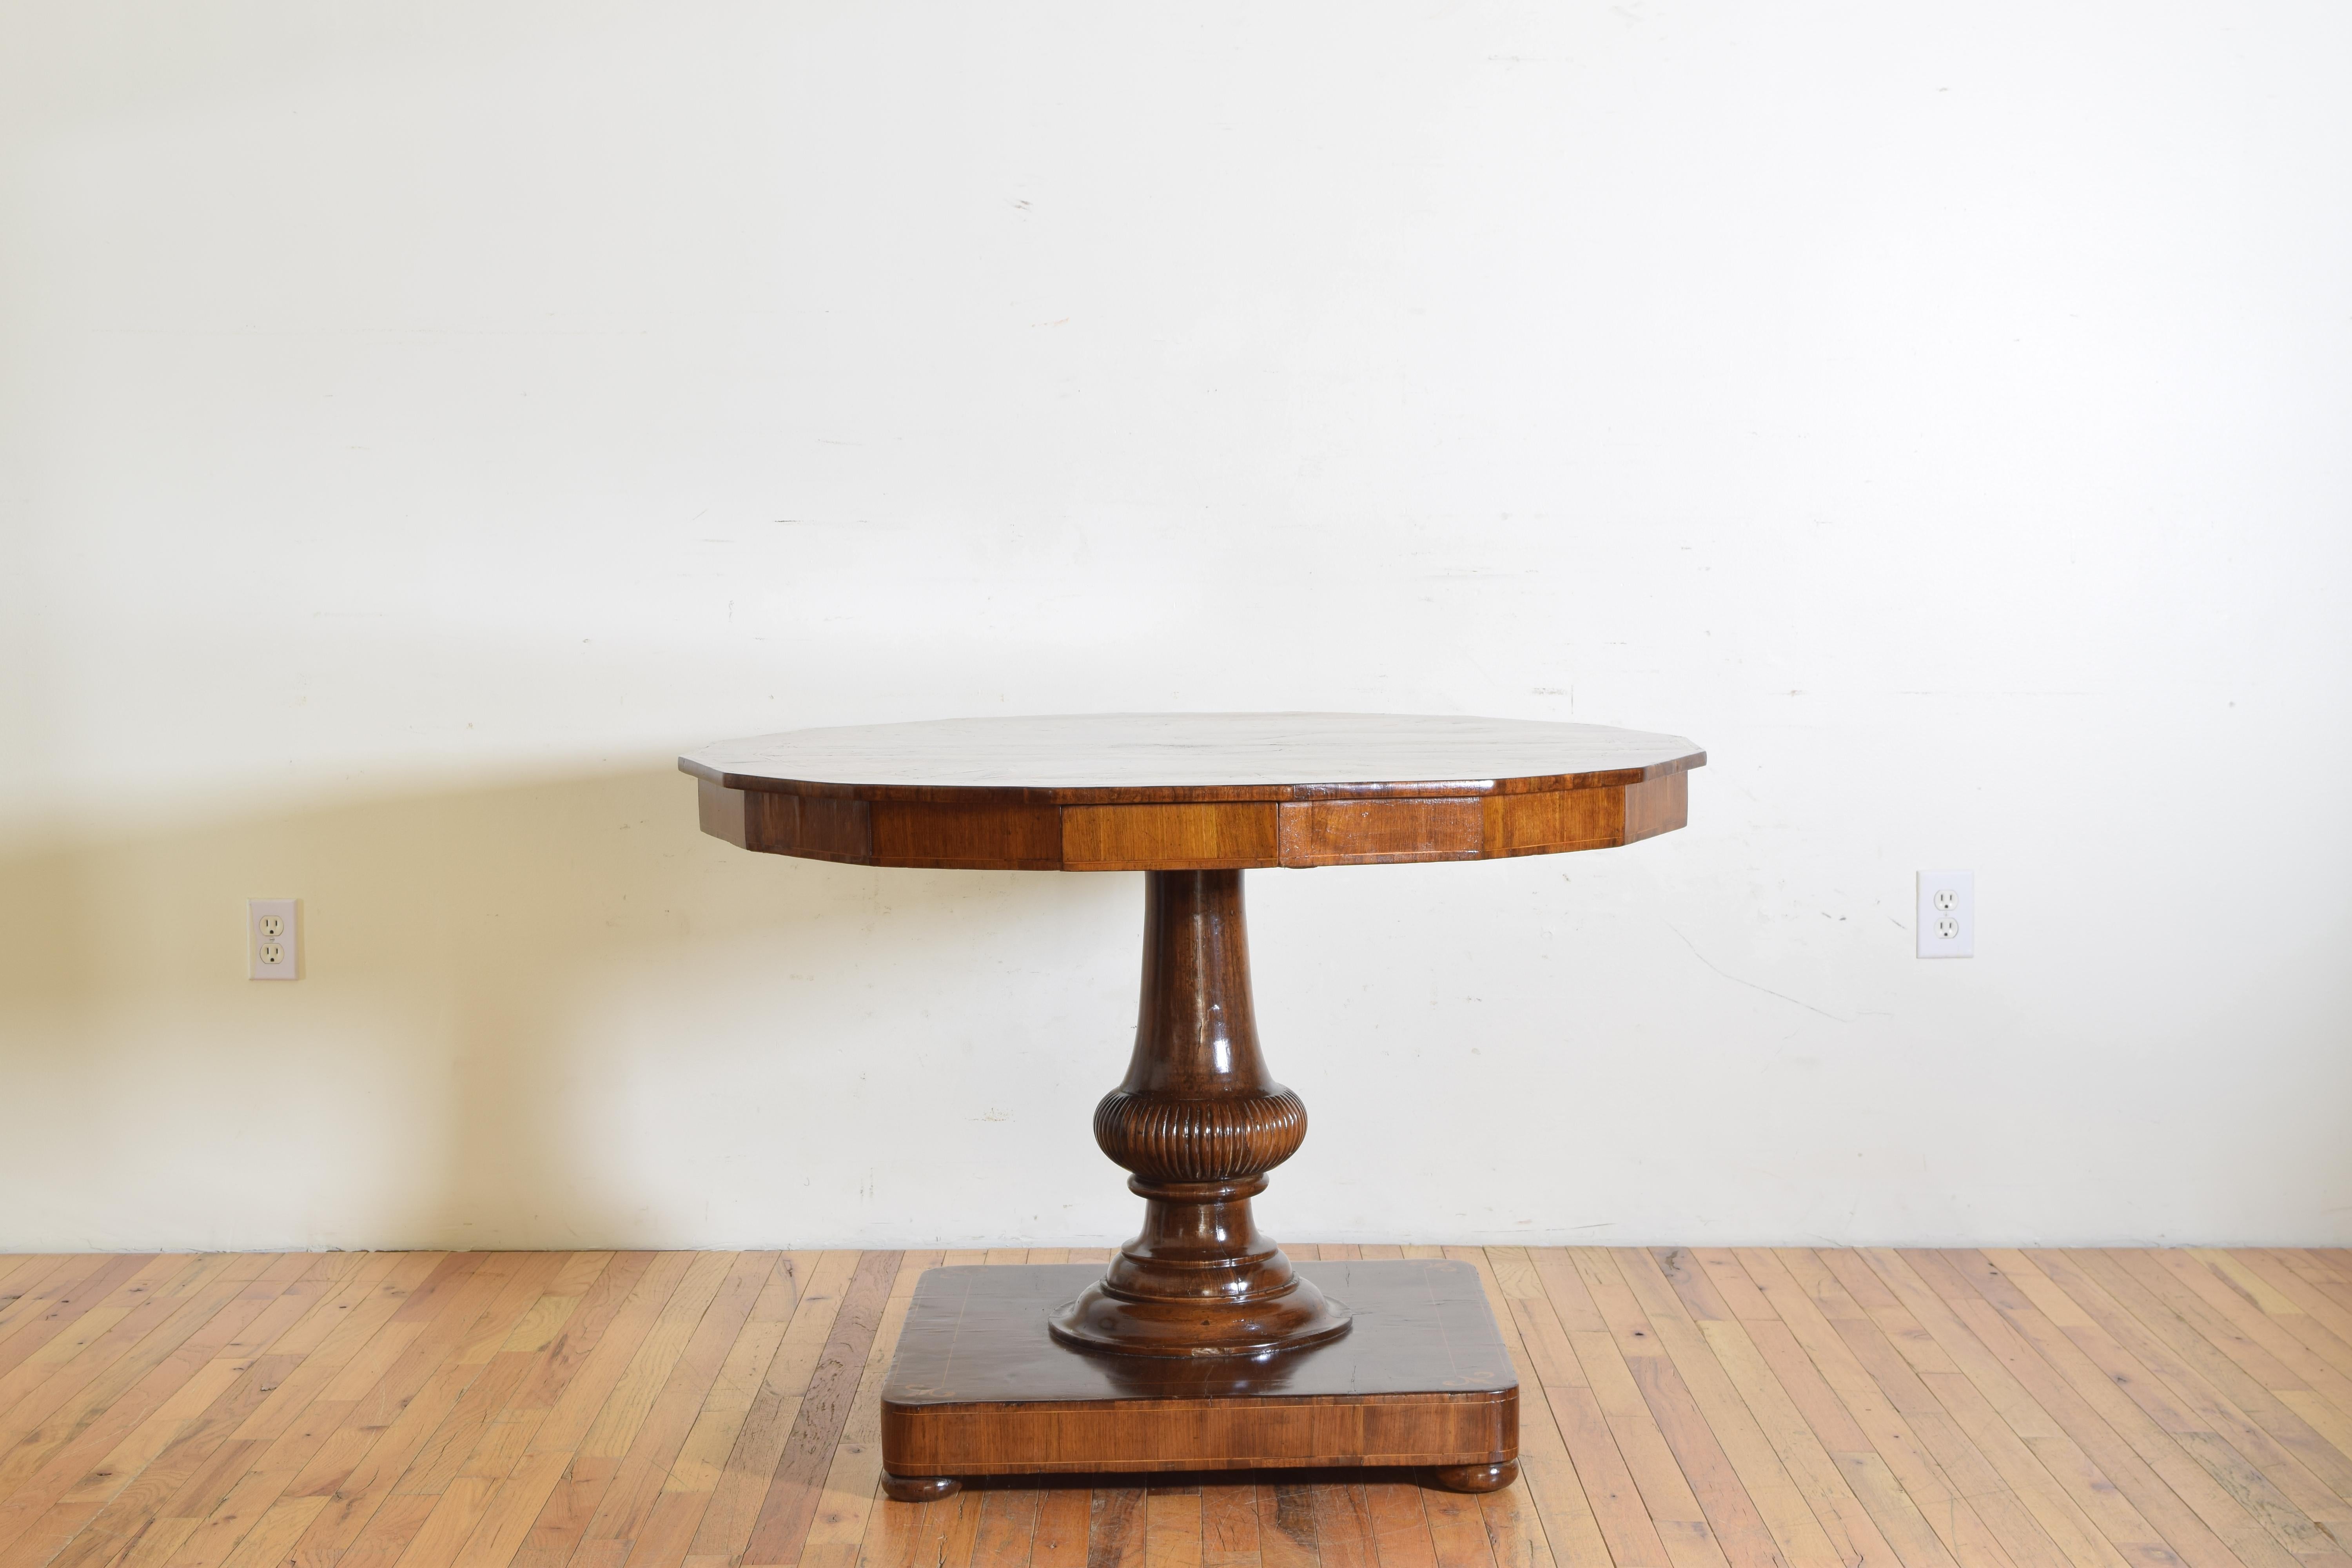 A hexadecanoic shaped tabletop is Inlaid with fruitwood fleur-de-lis, a stylized lily, symbolizing life, perfection, and light. The central pedestal is shaped, carved, and raised on a veneered and inlaid plinth base with matching fleur-de-lis in the